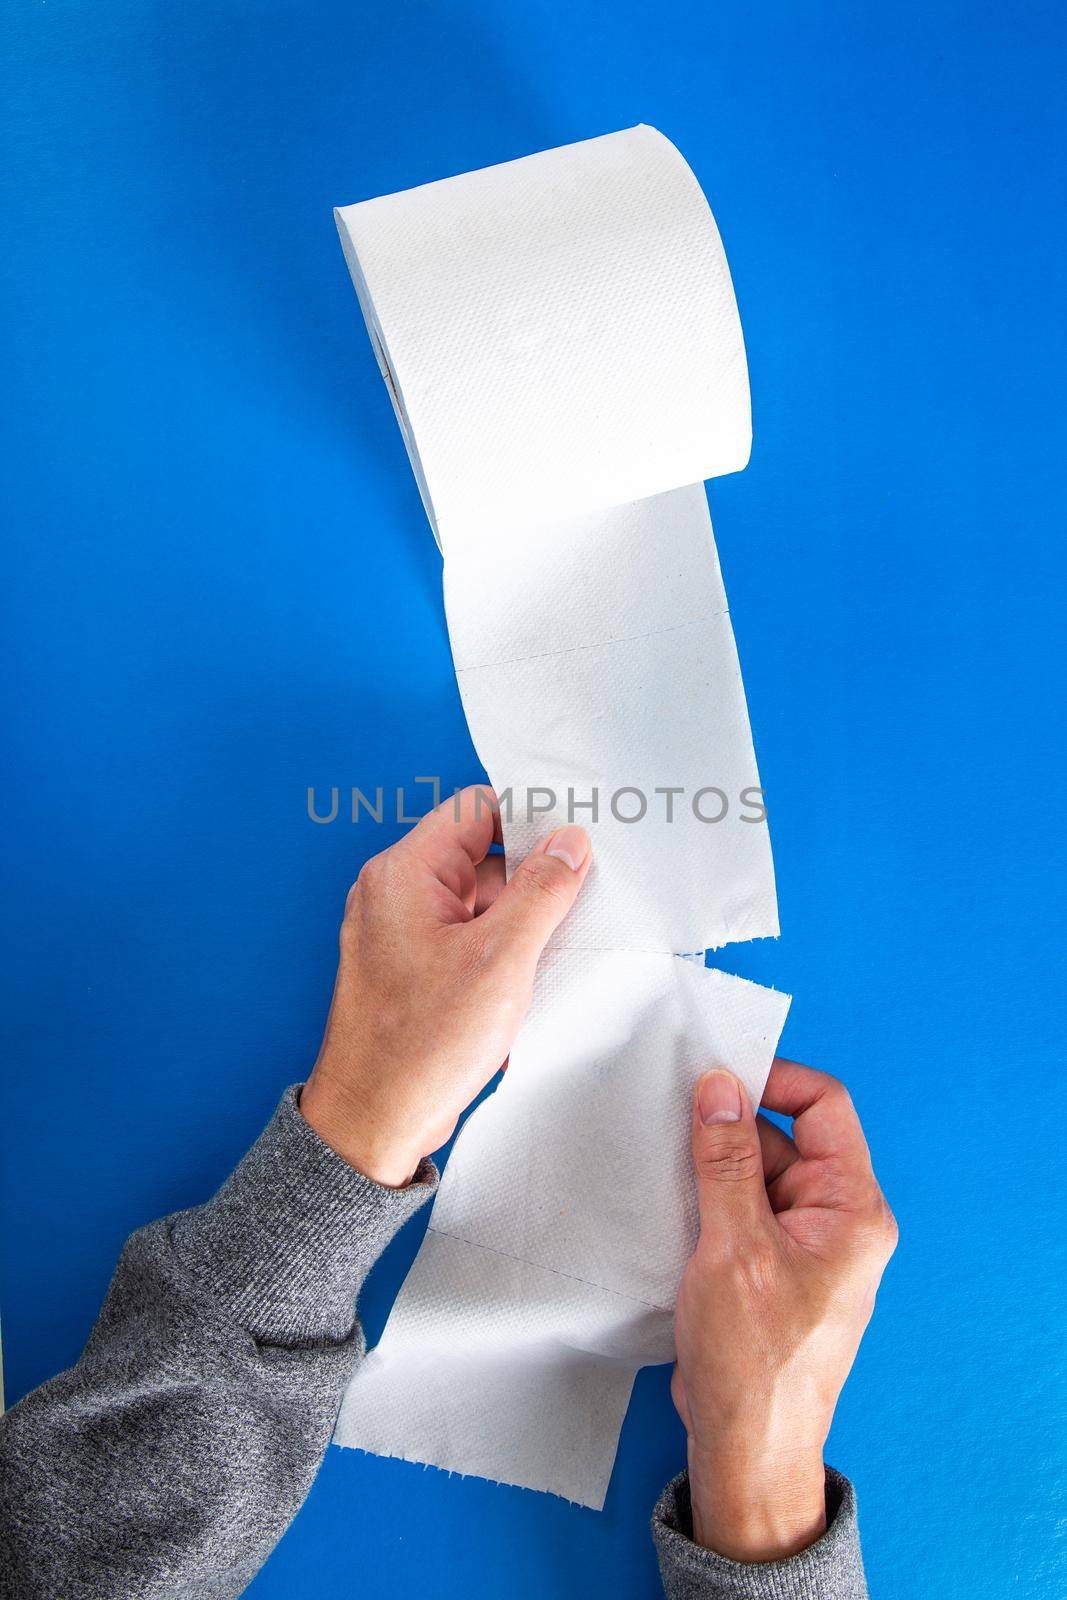 Hand tearing a piece of toilet roll, on the blue background by tehcheesiong